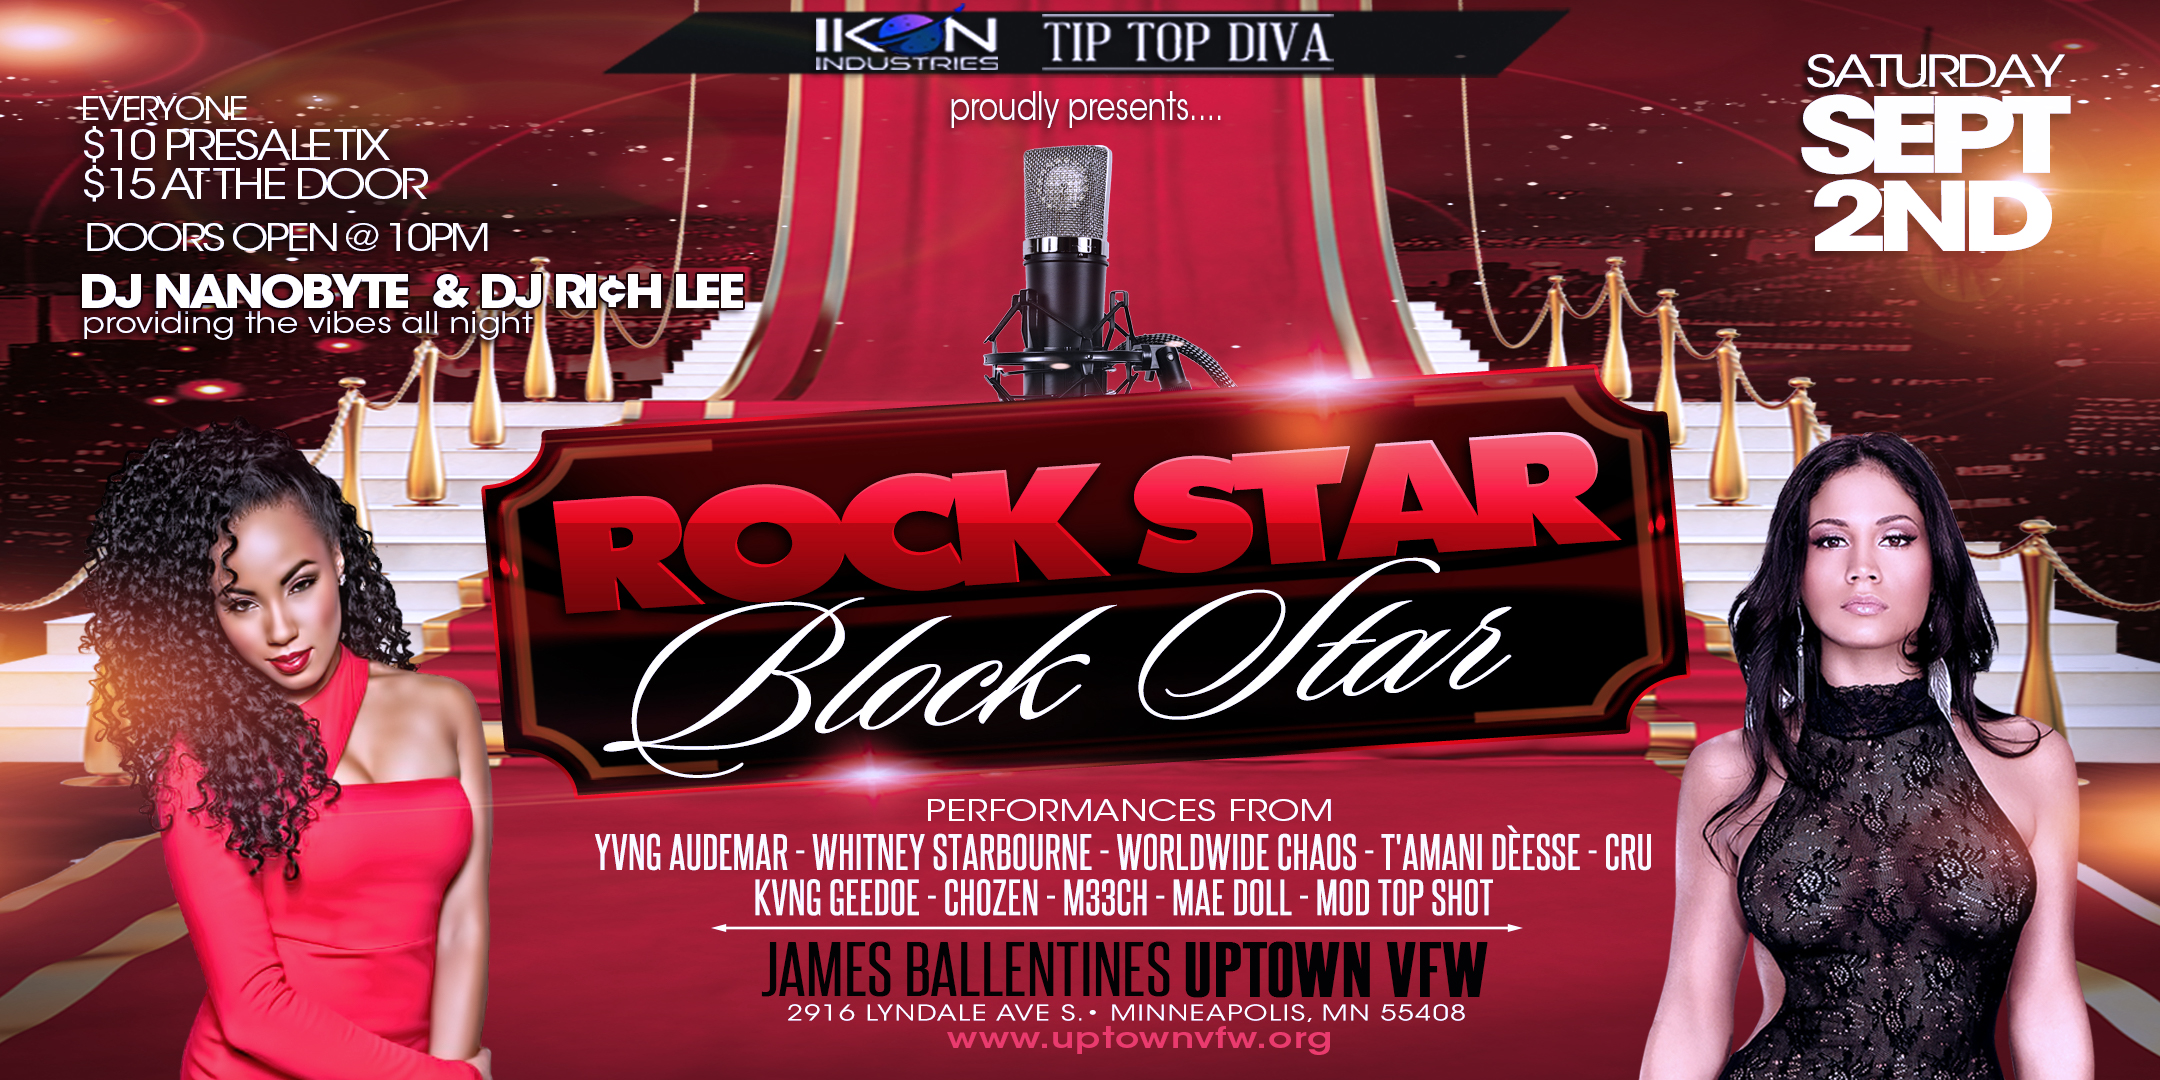 IKON INDUSTRIES, LLC IN ASSOCIATION WITH TIP TOP DIVA, LLC Proudly Presents.. ROCK STAR BLOCK STAR Performances From YVNG AUDEMAR | WHITNEY STARBOURNE | WORLDWIDE CHAOS T'AMANI DEESSE | CRU | KVNG GEEDOE | CHOZEN | M33CH MAE DOLL | MOD TOP SHOT | DJ NANOBYTE & RICH LEE Saturday September 2 James Ballentine "Uptown" VFW Post 246 2916 Lyndale Ave S. Doors 10:00pm :: Music 10:00pm :: 21+ GA $10 ADV / $15 DOS Tickets On Sale Now